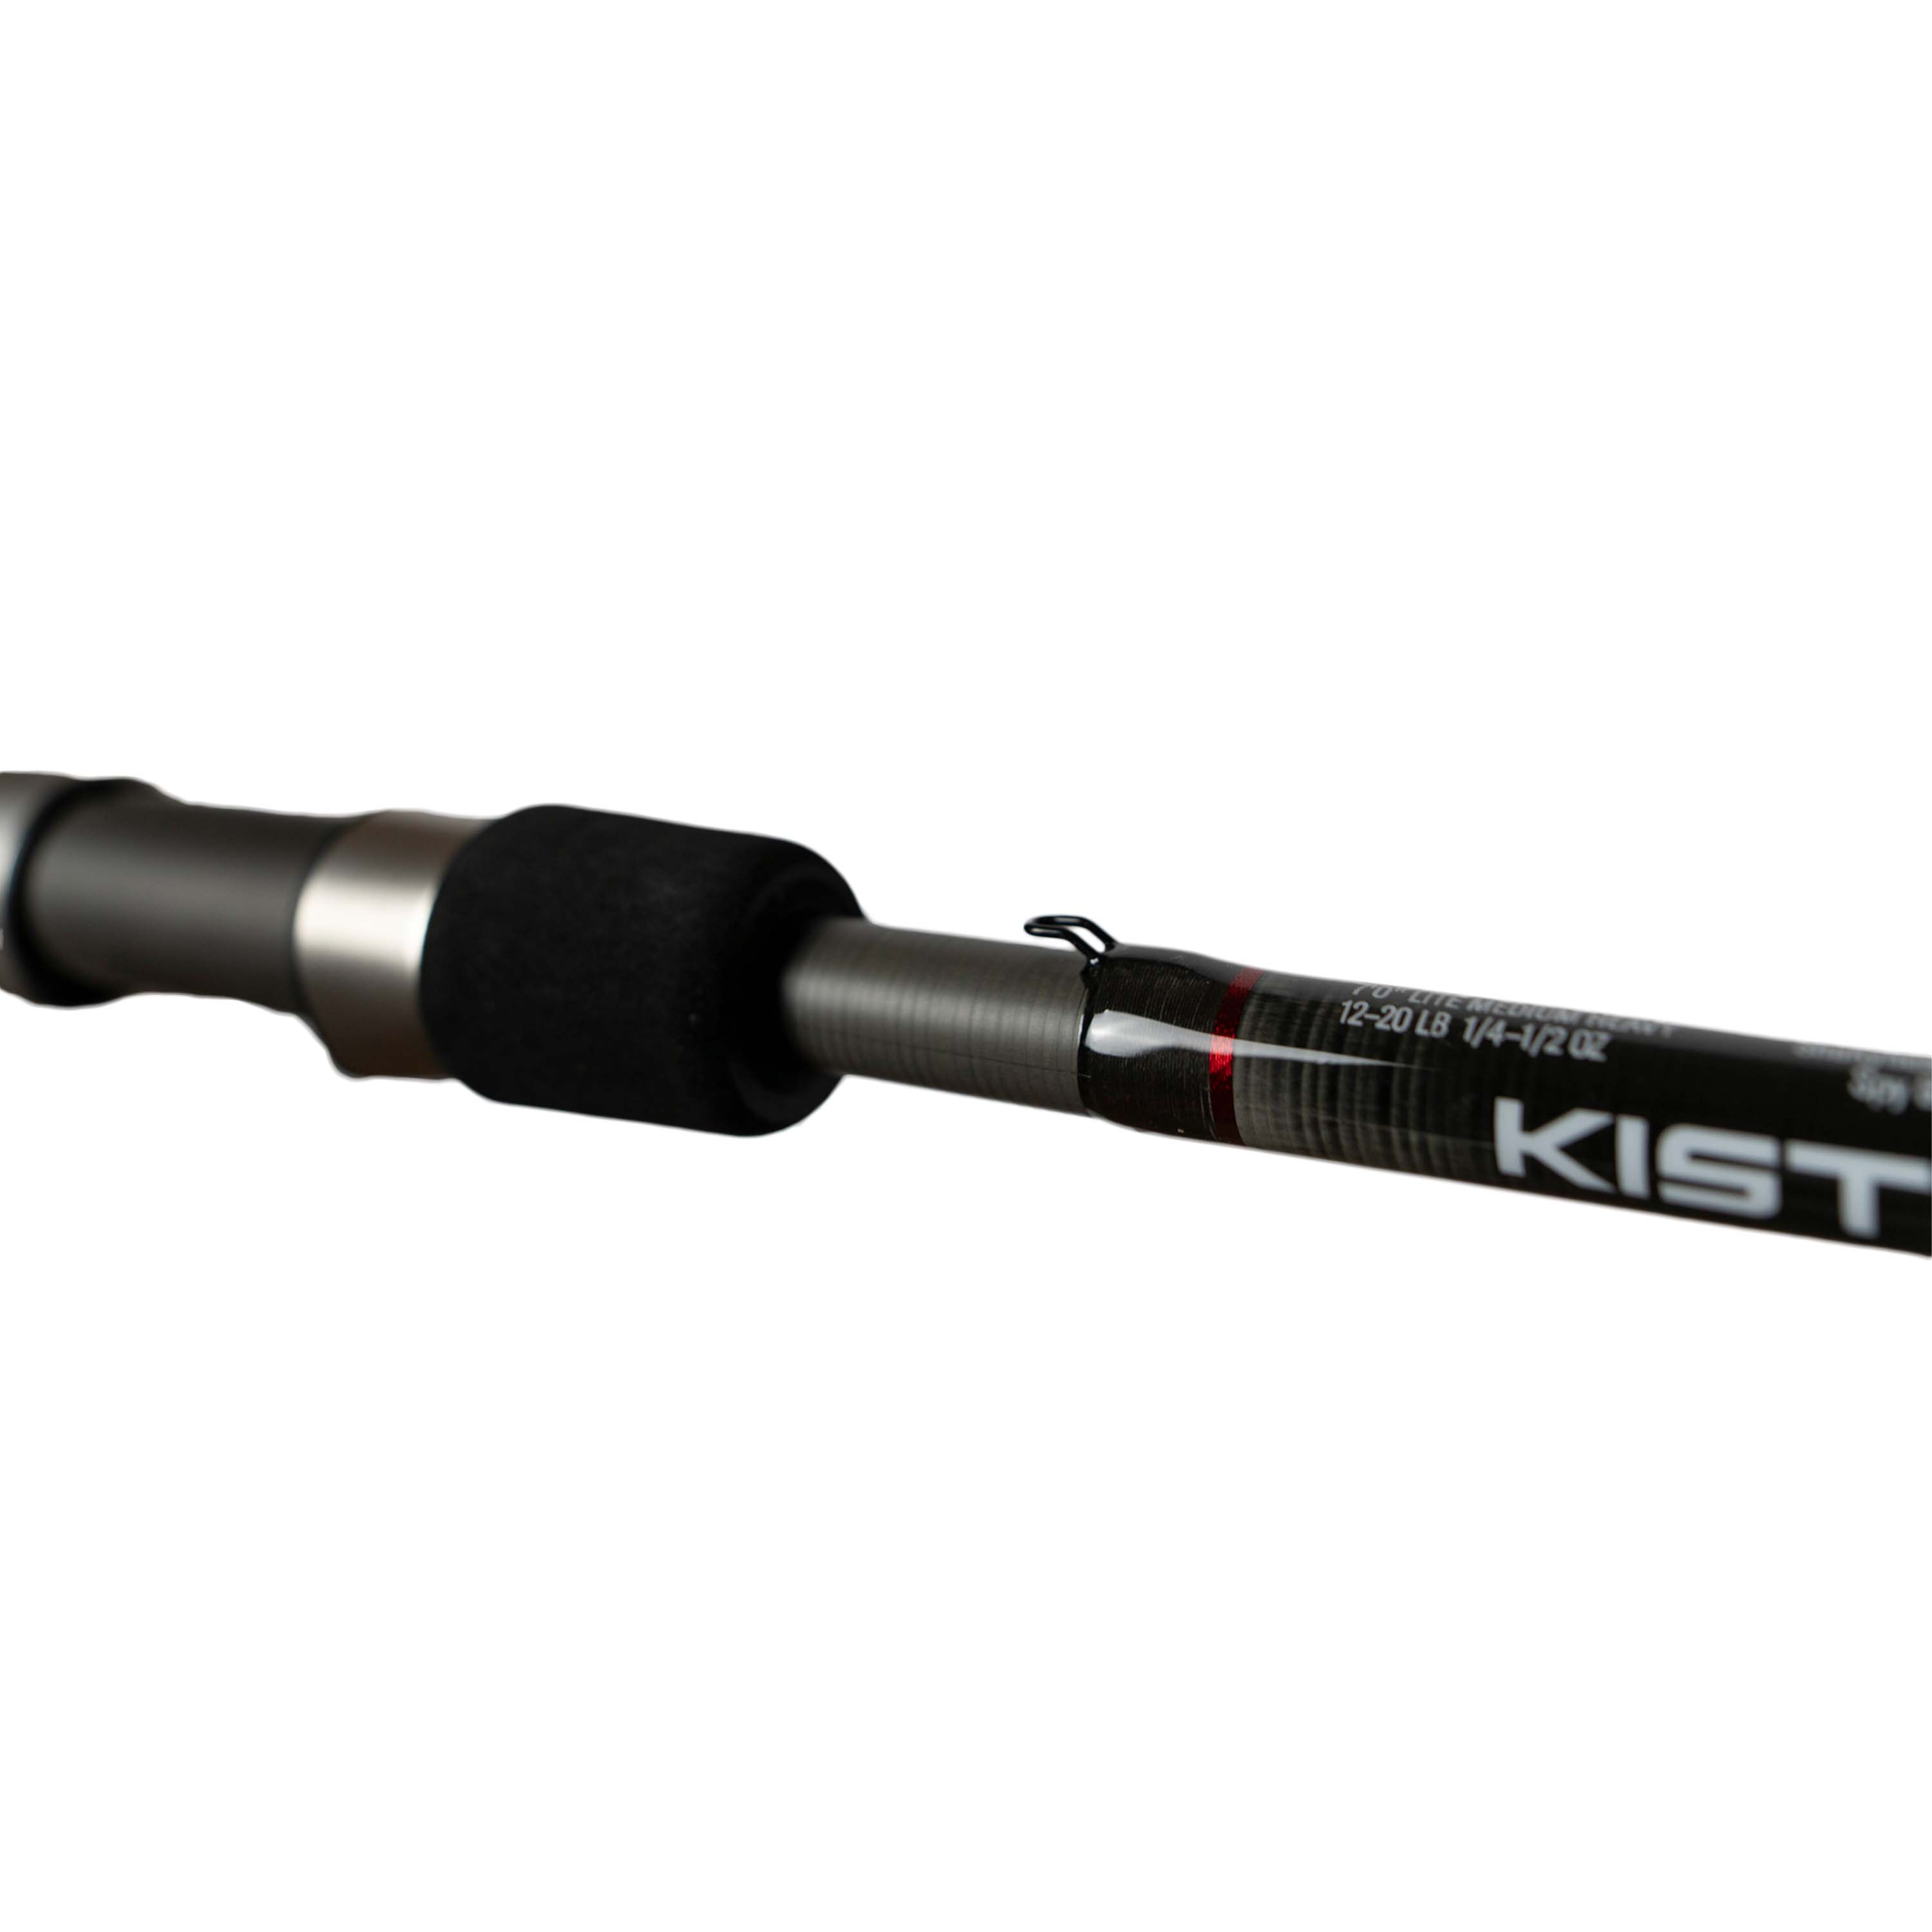 The Best Fishing Rod Accessories in 2022 – KastKing